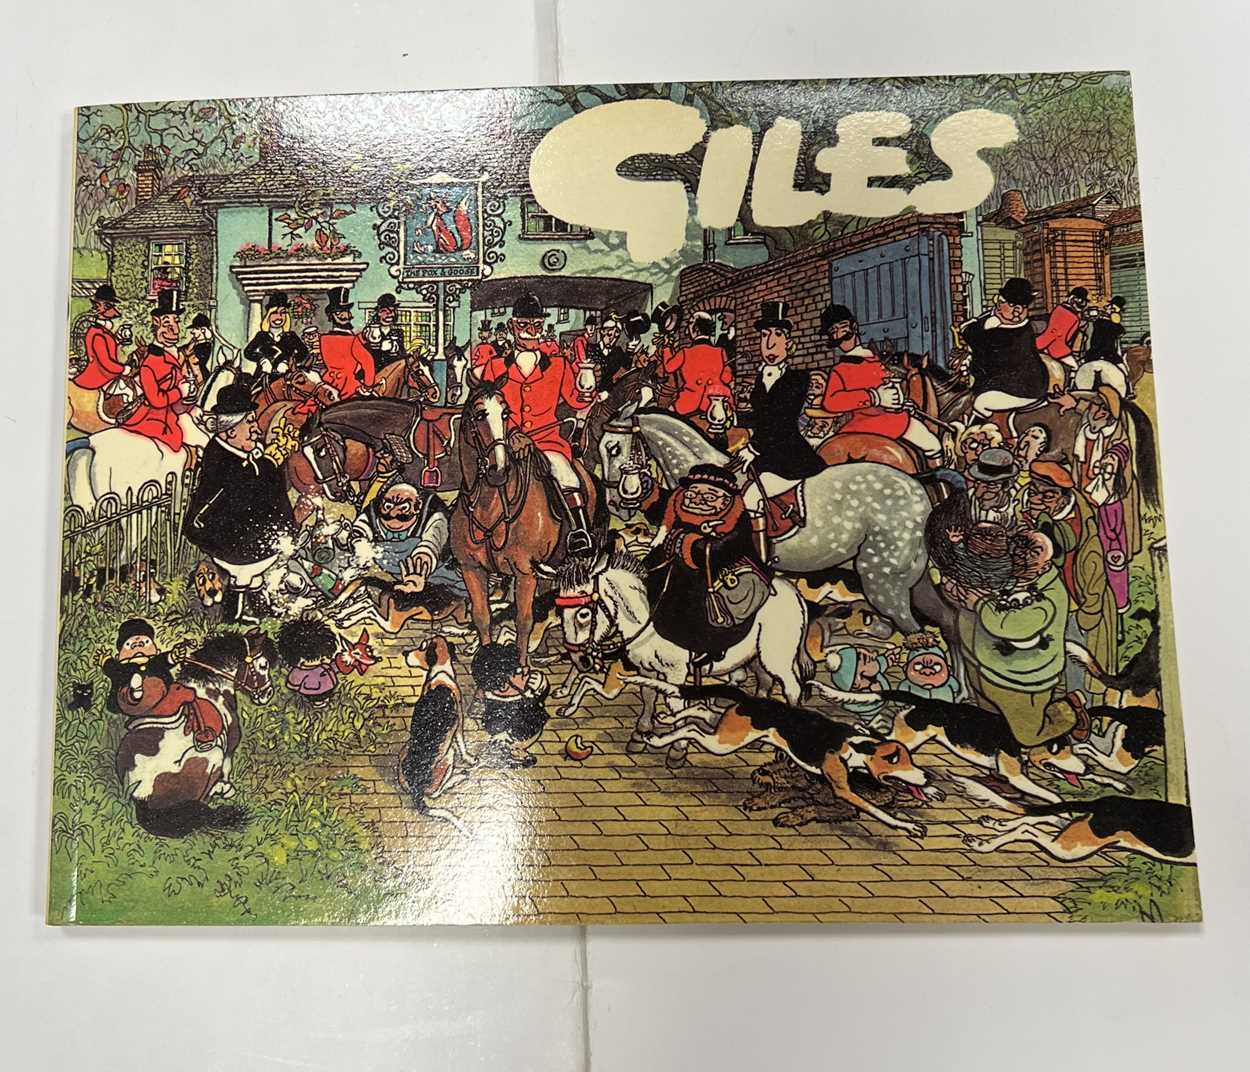 Giles - A collection of cartoon annuals from 1959, 1960, 1967, 1968, 1969, 1970, 1971, 1976, 1979, - Image 4 of 19